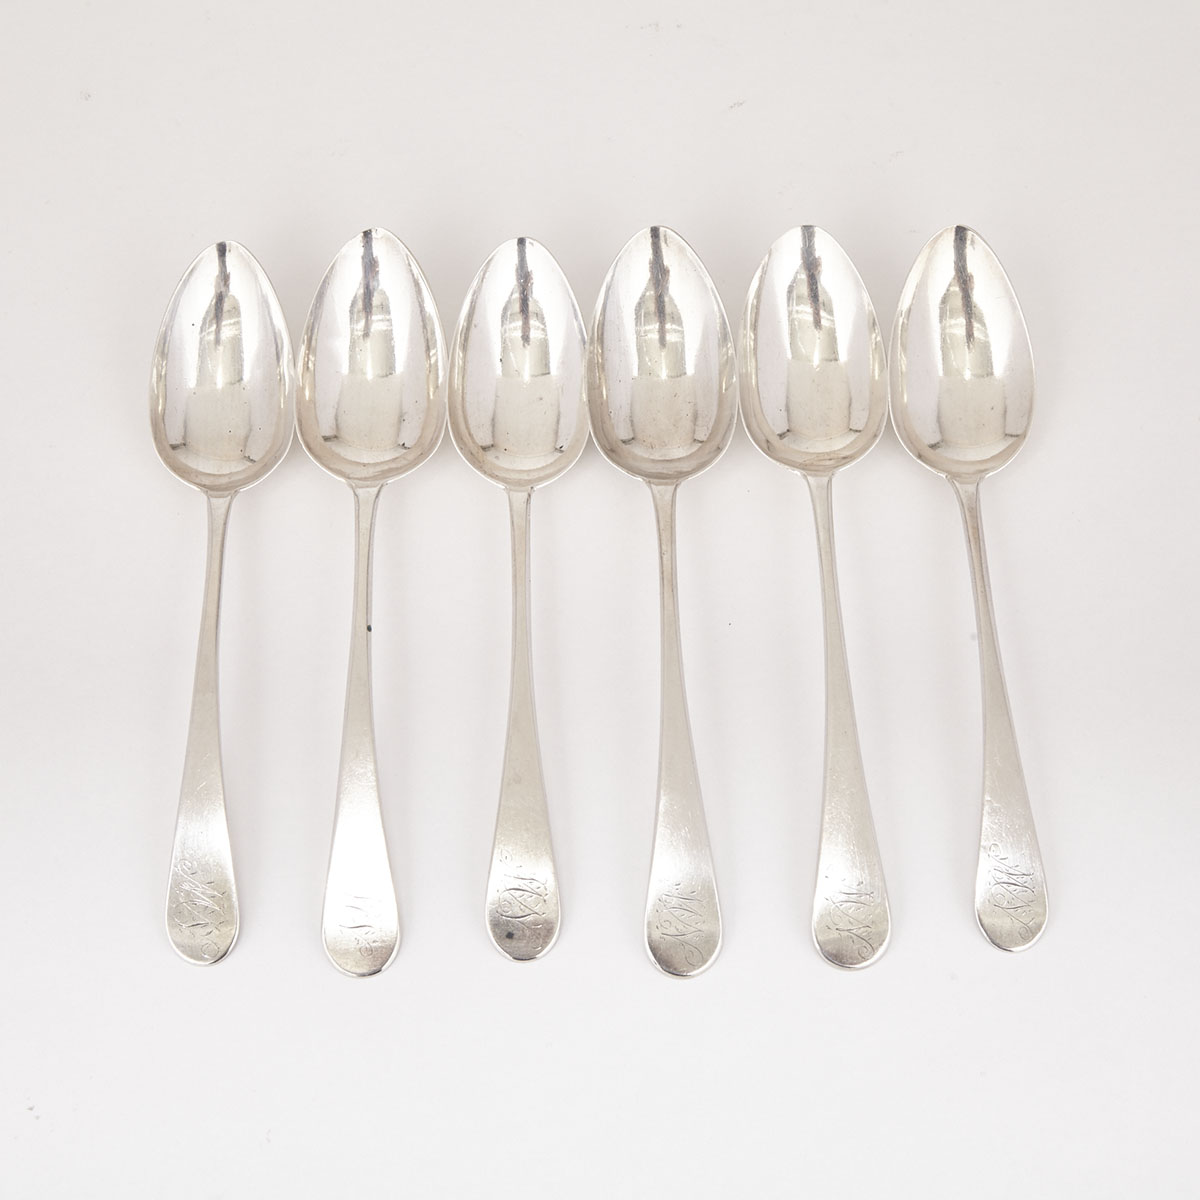 Six Silver Table Spoons, probably American, c.1800